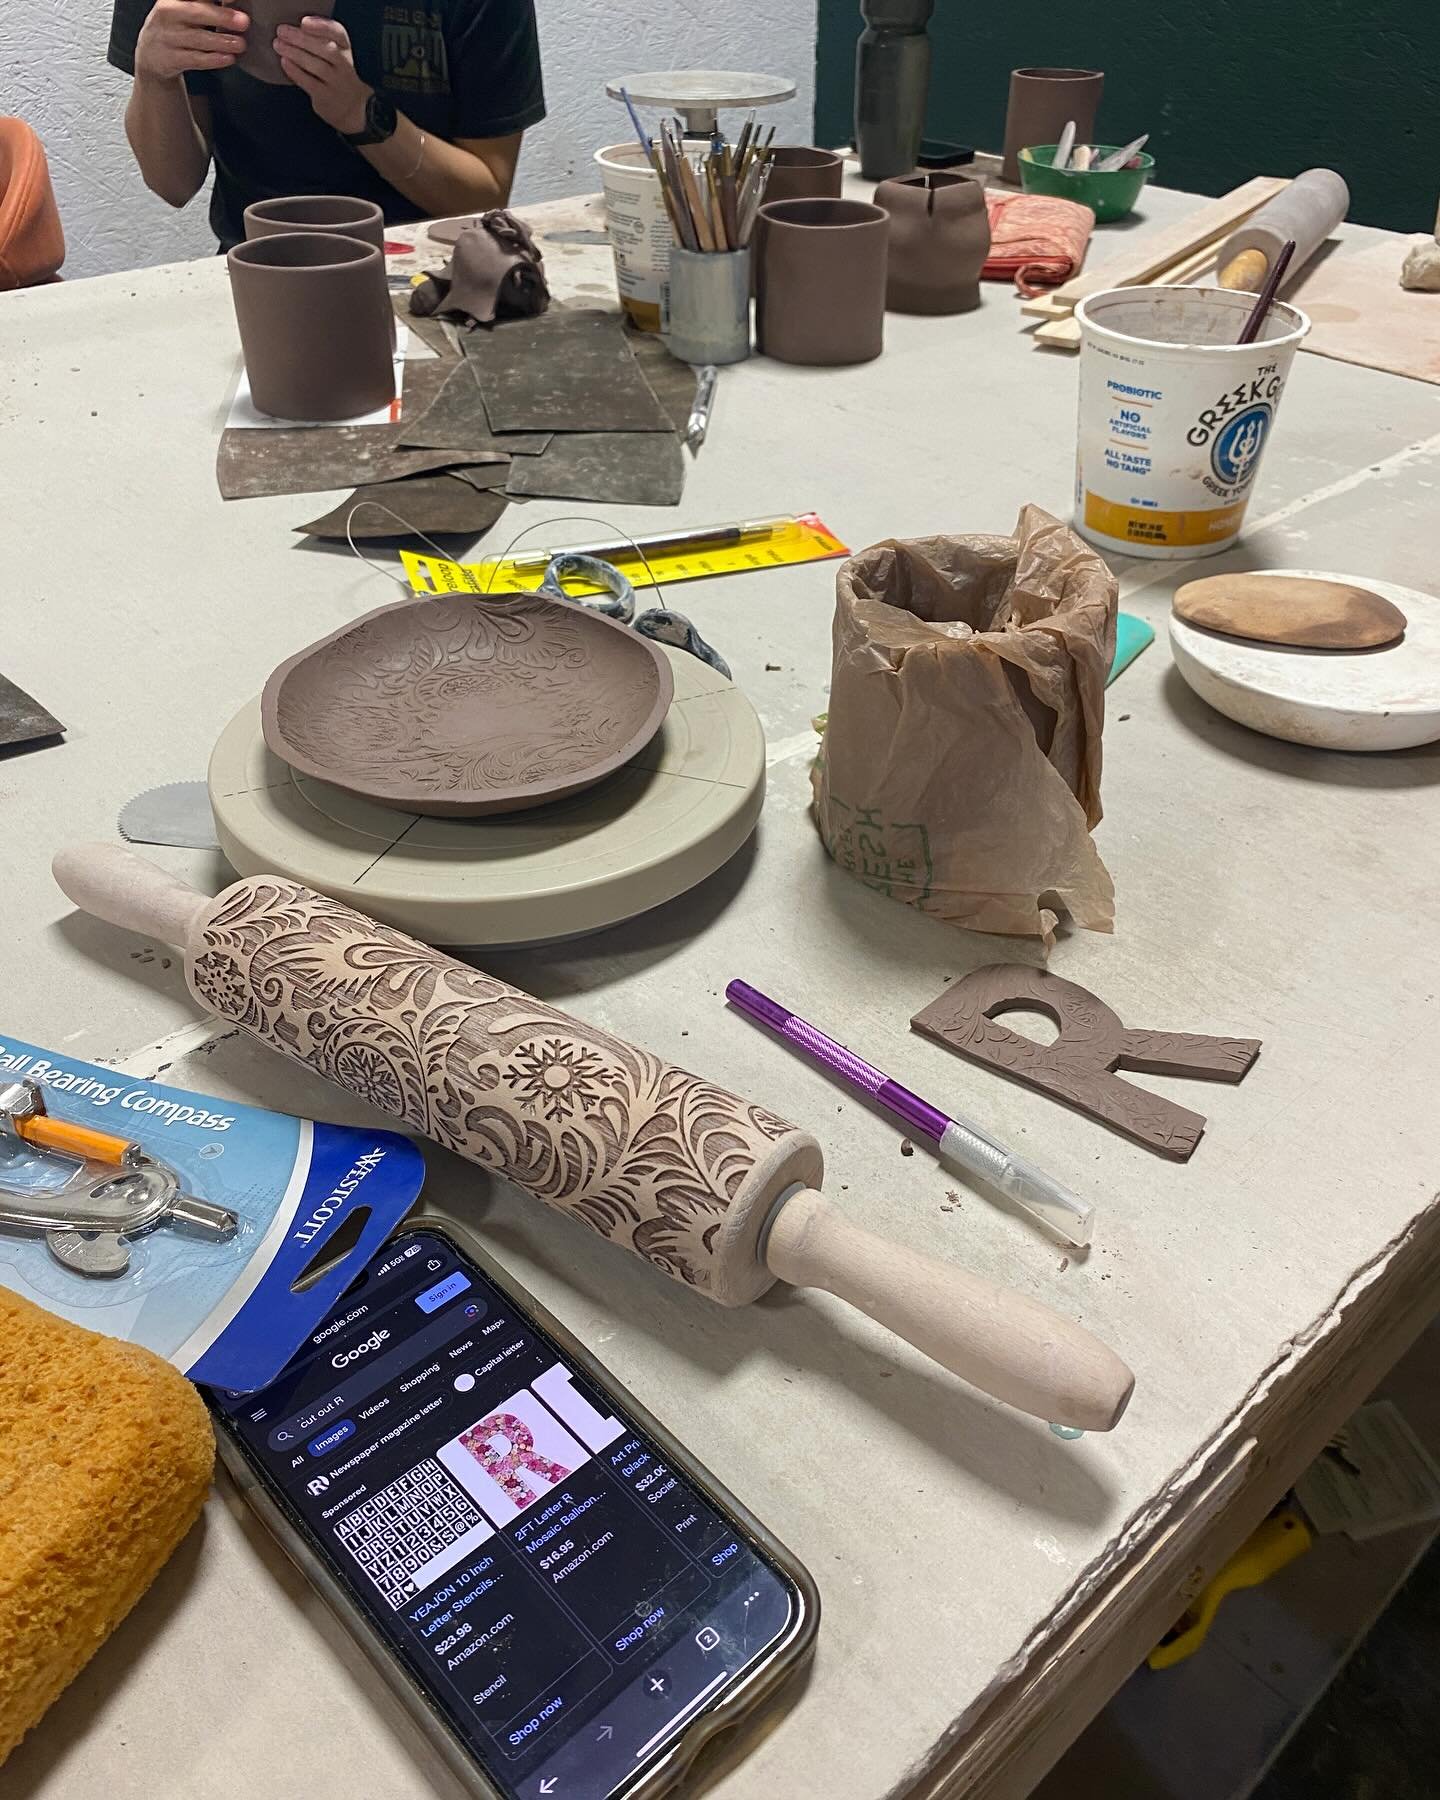 Our fist summer session has not one, but two (thats right TWO!) classes with the lovely @mariastonestudio. Intro to Handbuilding has moved to Monday evenings and a new class Exploring Surface Decoration has been added on Wednesday evenings. This new 